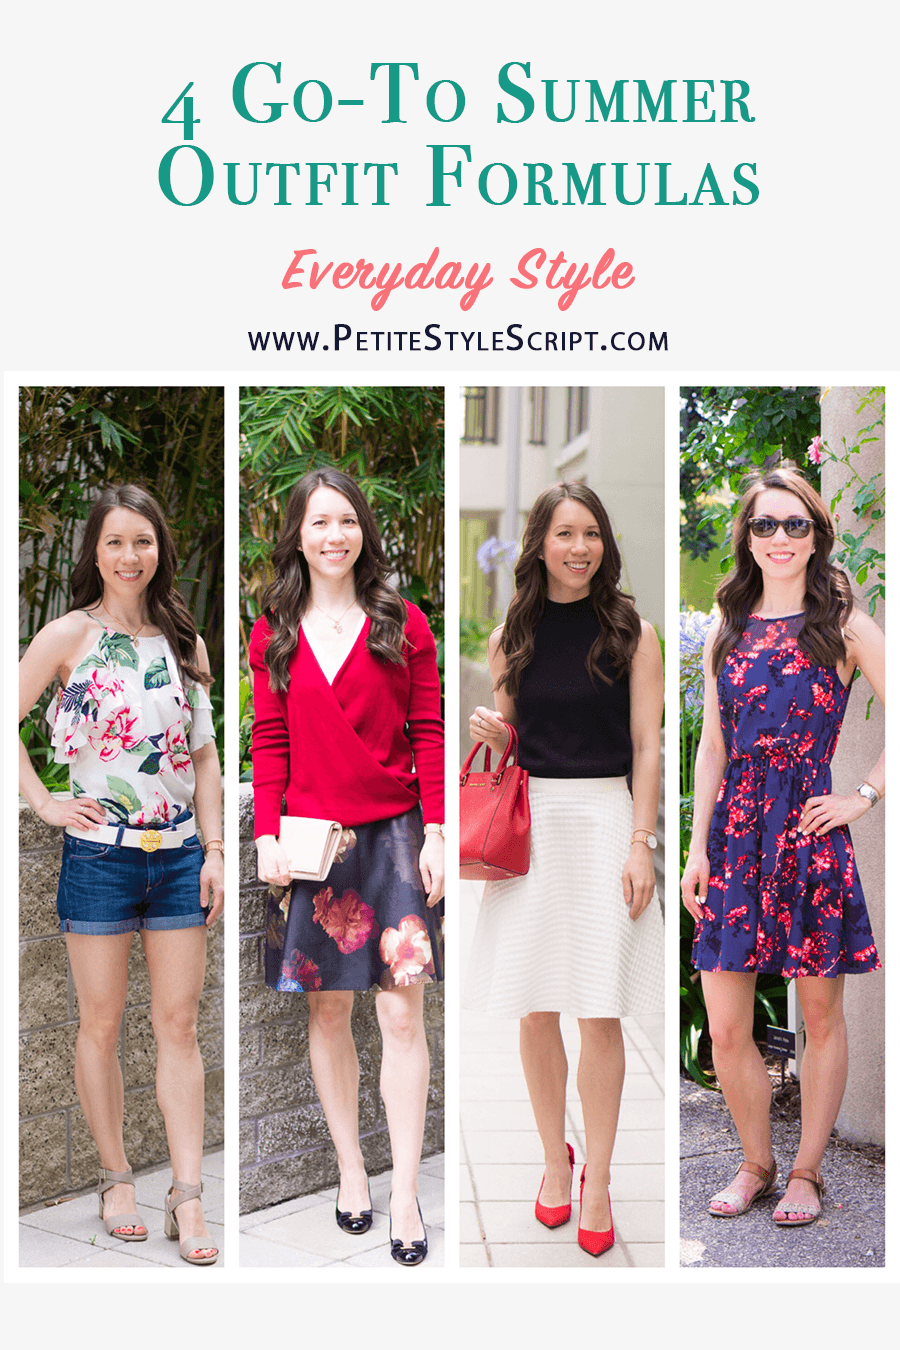 4 Go-To Summer Outfit Formulas | thredUP review | Secondhand first | Capsule Wardrobe | Project333 | Theory white skirt | Floral skirt | NIC+ZOE red cardigan | red bow heels | floral dress | Paige denim shorts floral top | petite fashion style blog